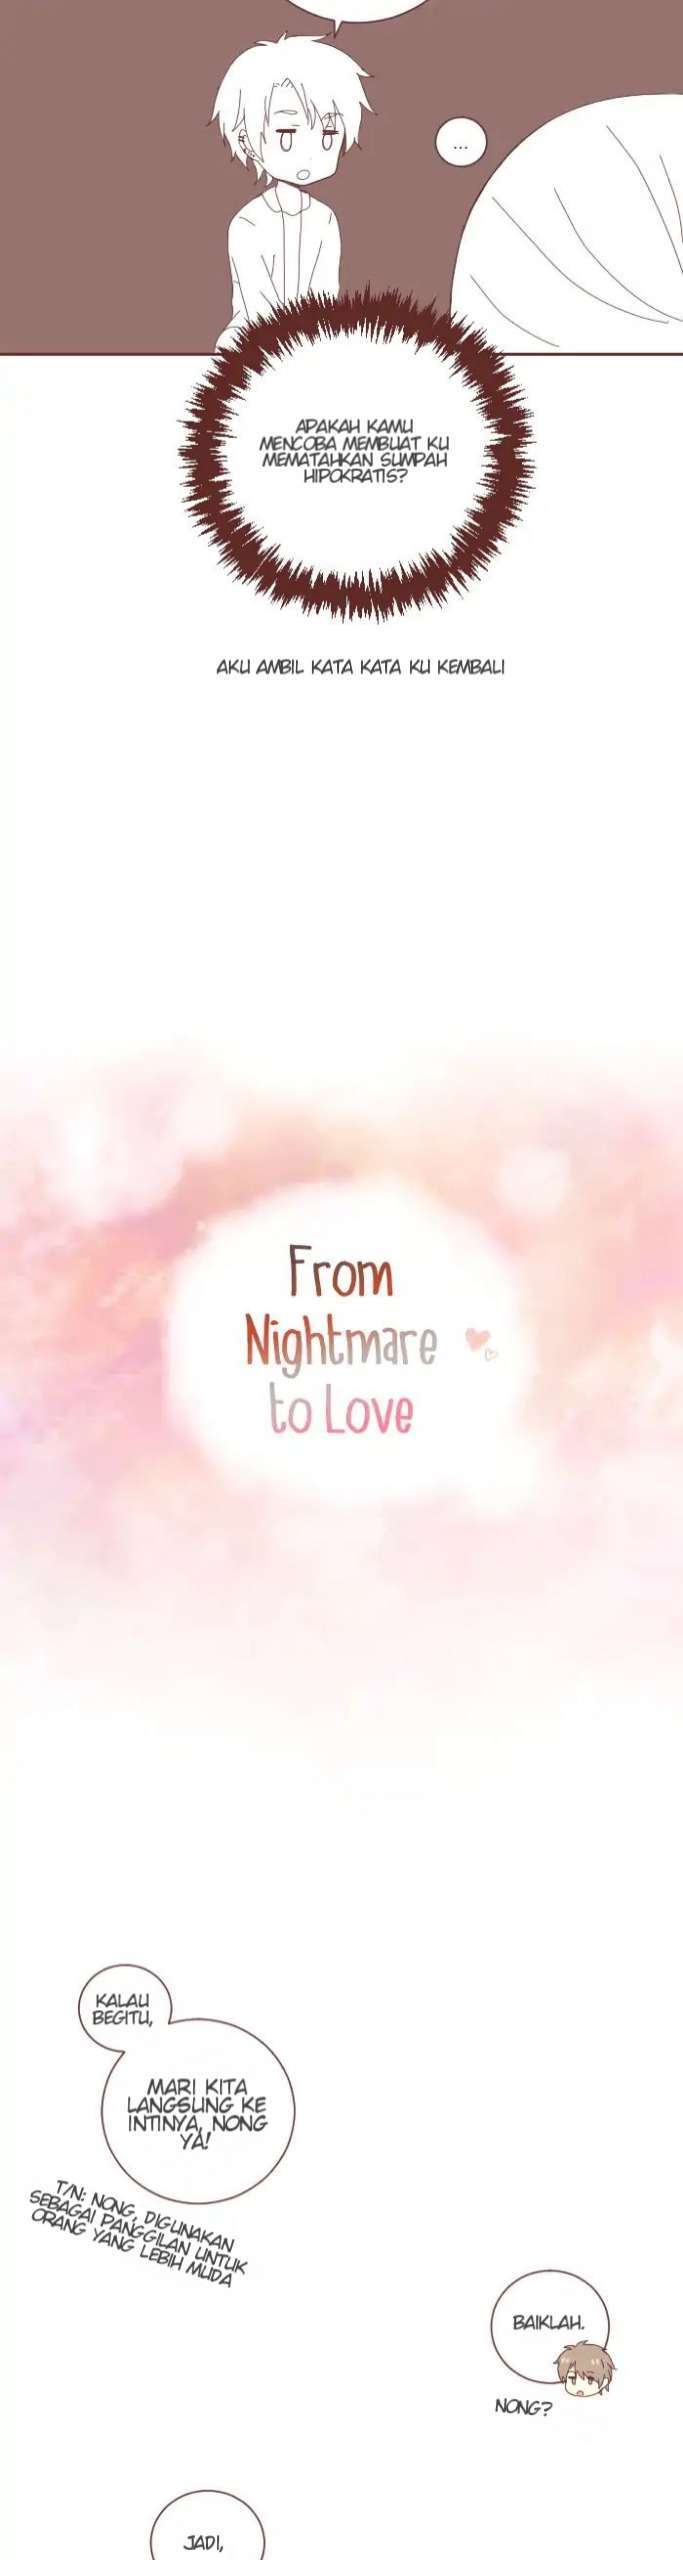 From Nightmare to Love Chapter 25